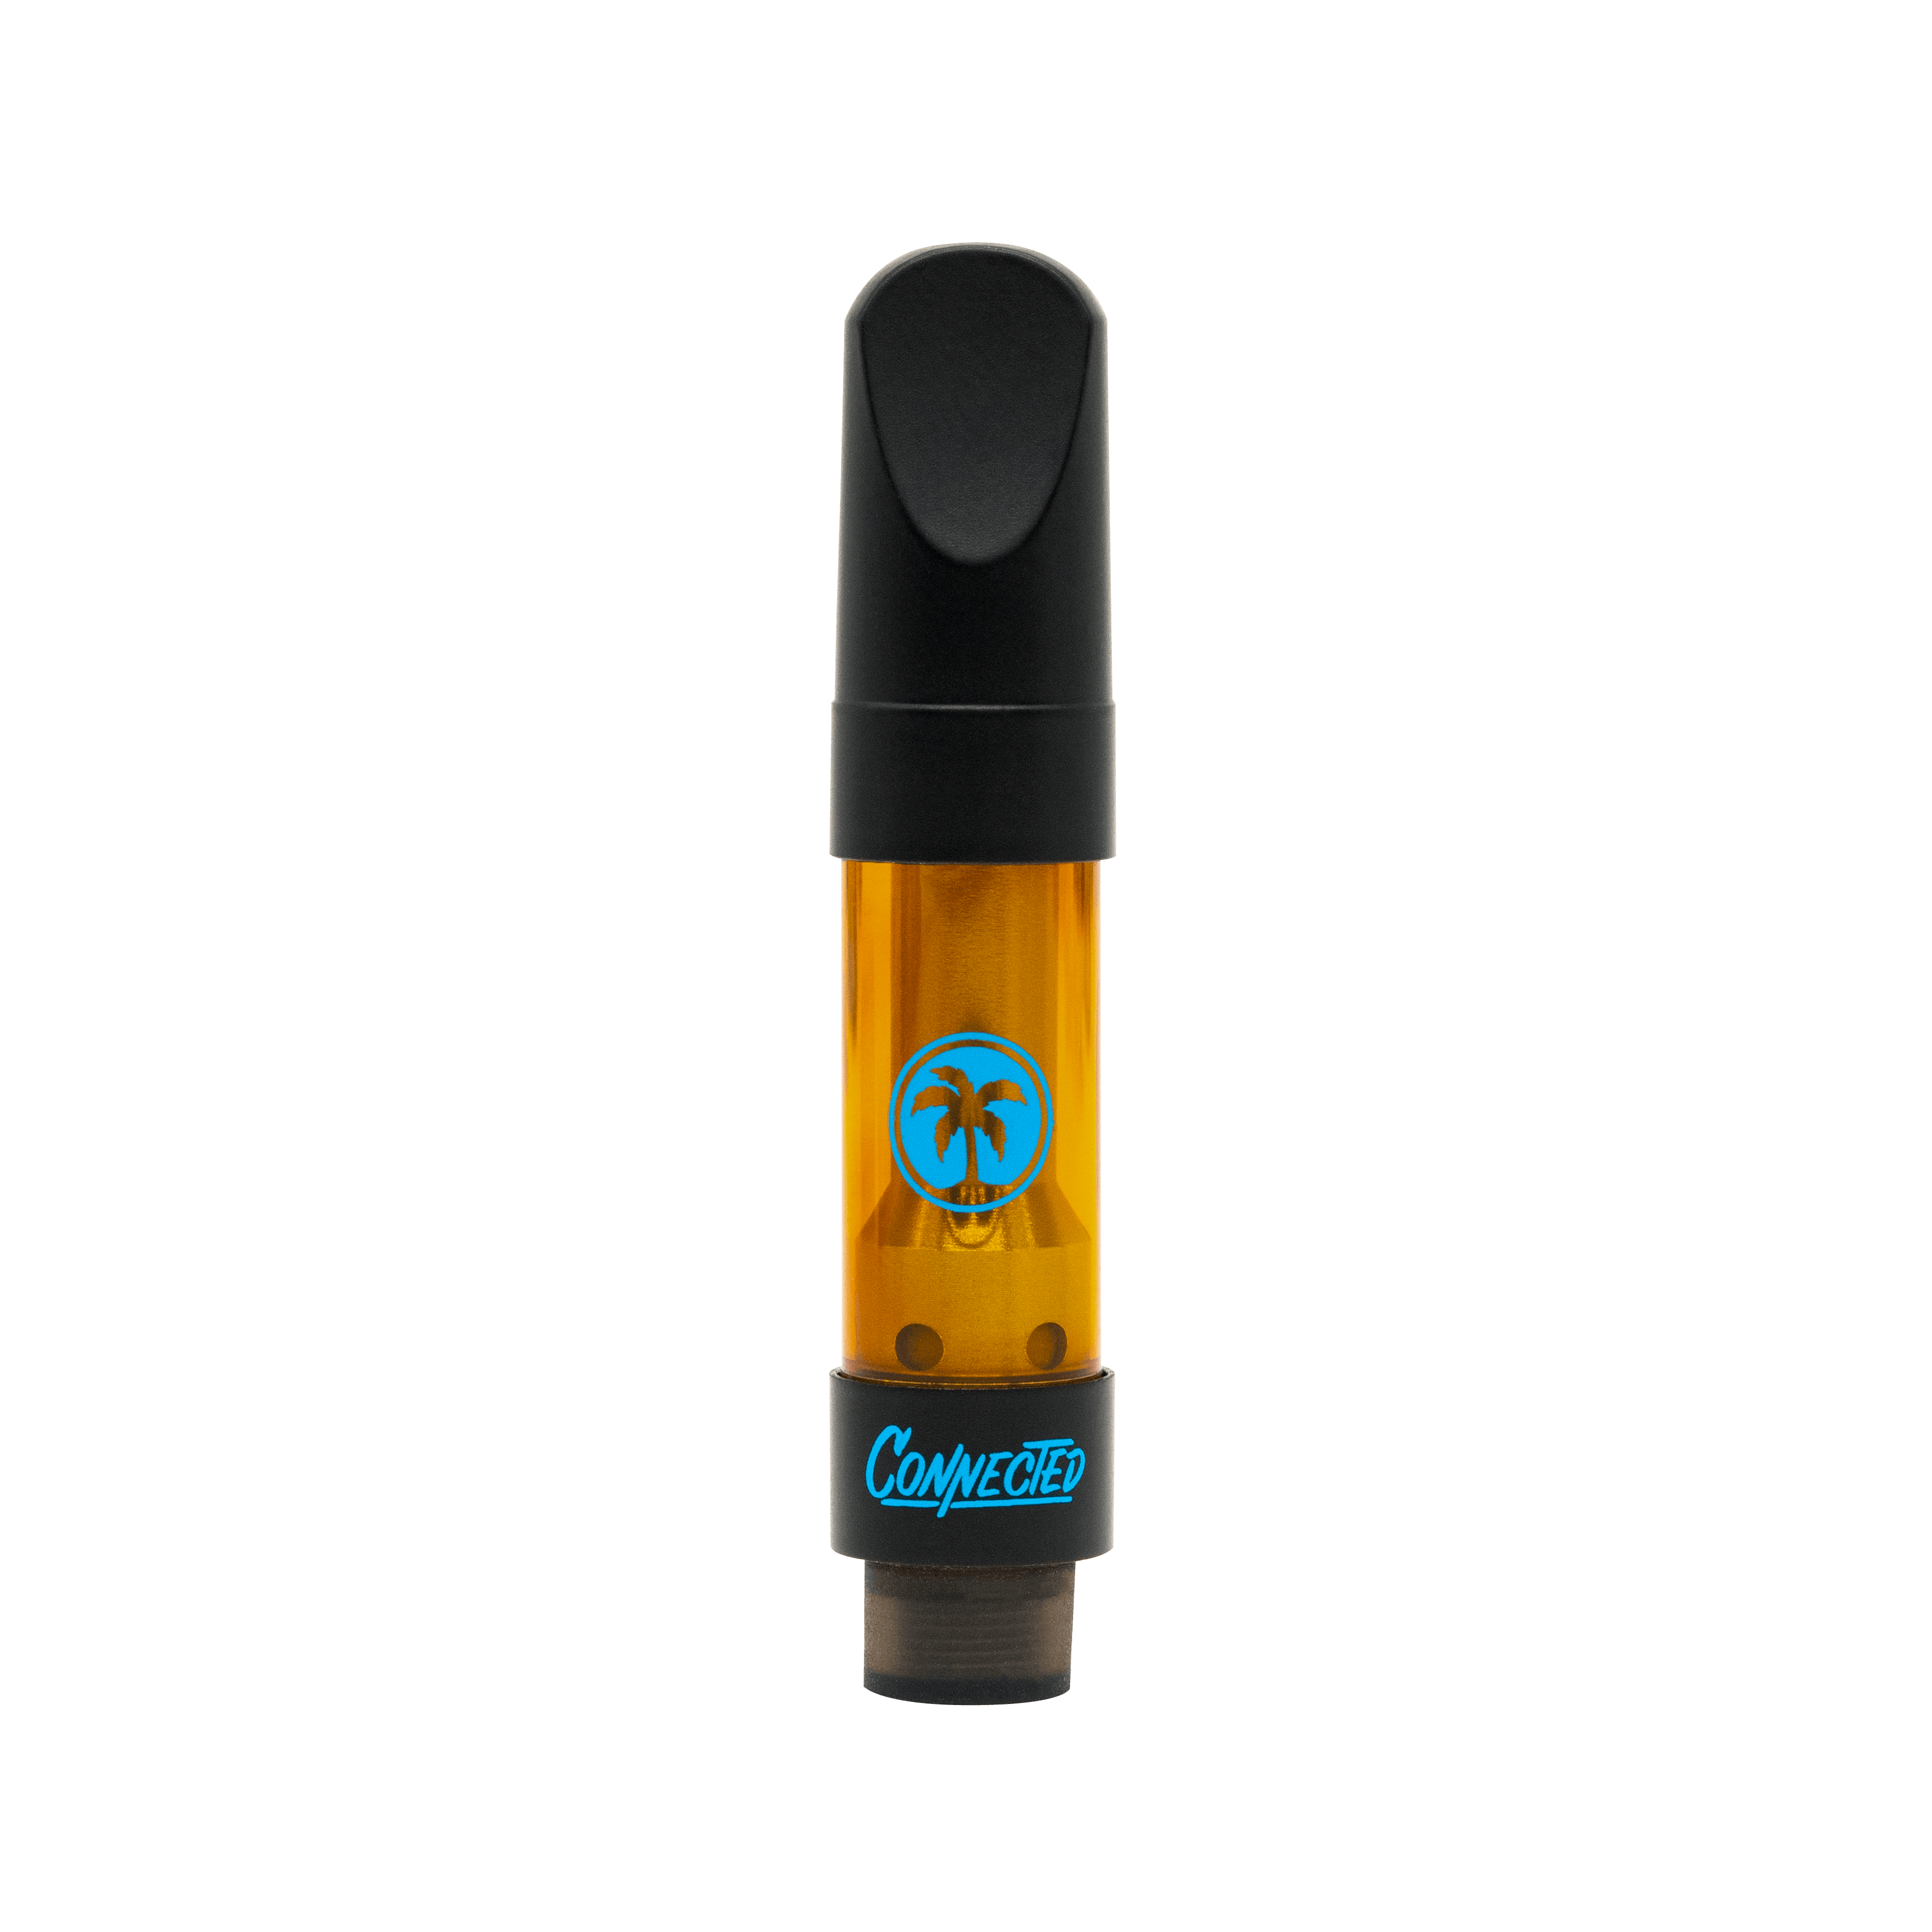 Guava 2.0 Live Resin Cartridge (1G) - Connected Cannabis Co